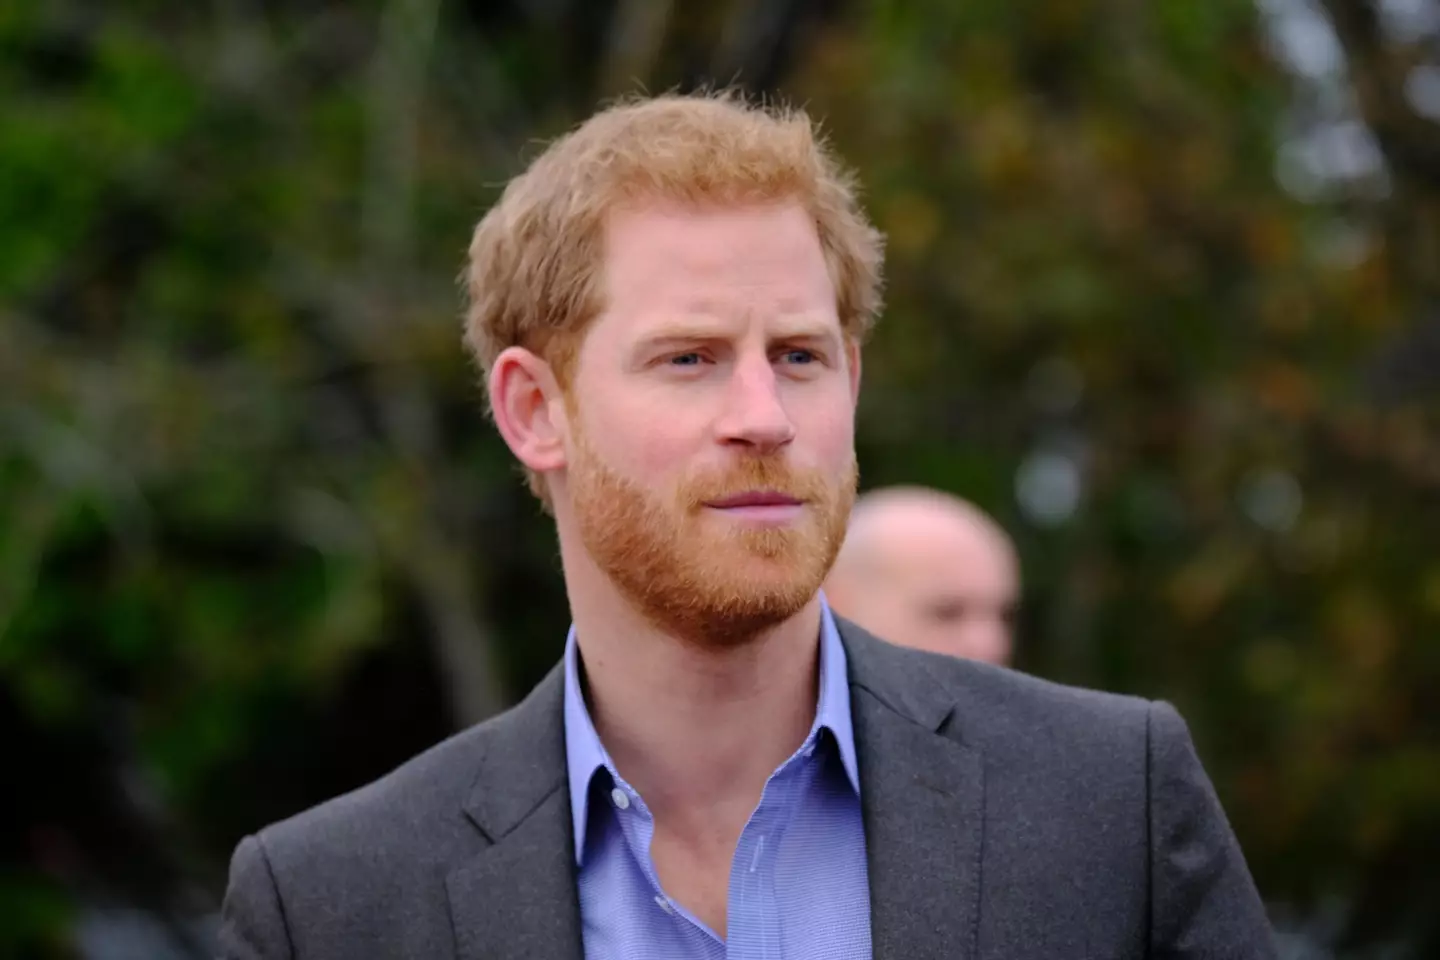 Prince Harry's new memoir was delayed following the Queen's death.